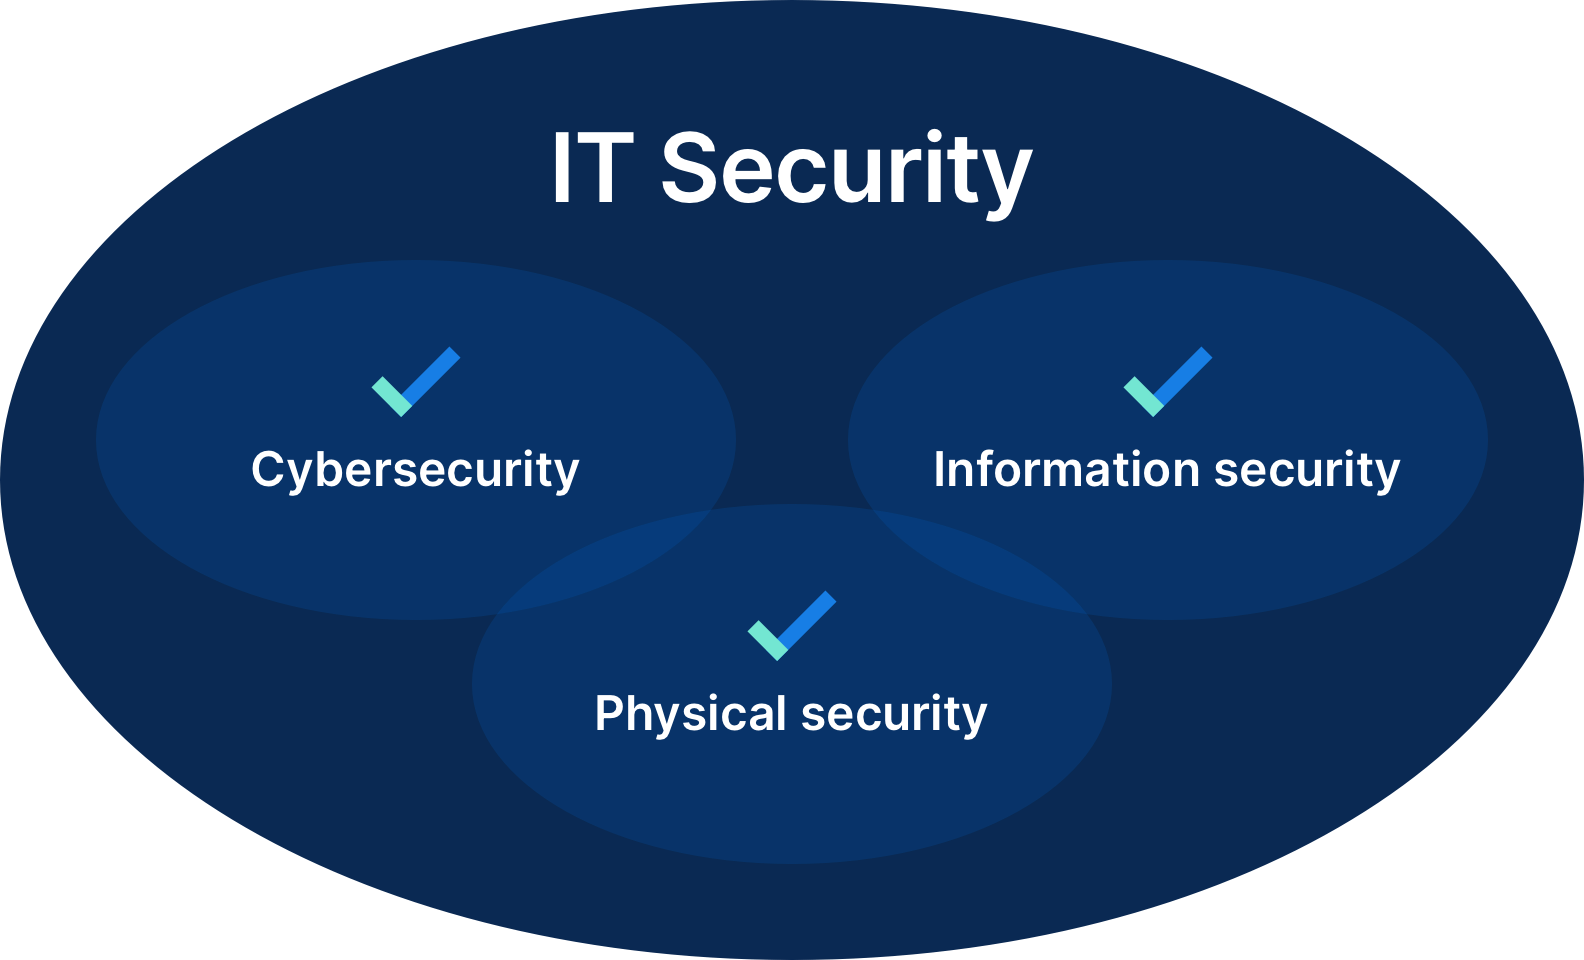 IT security encompasses physical security, infosec, and cybersecurity